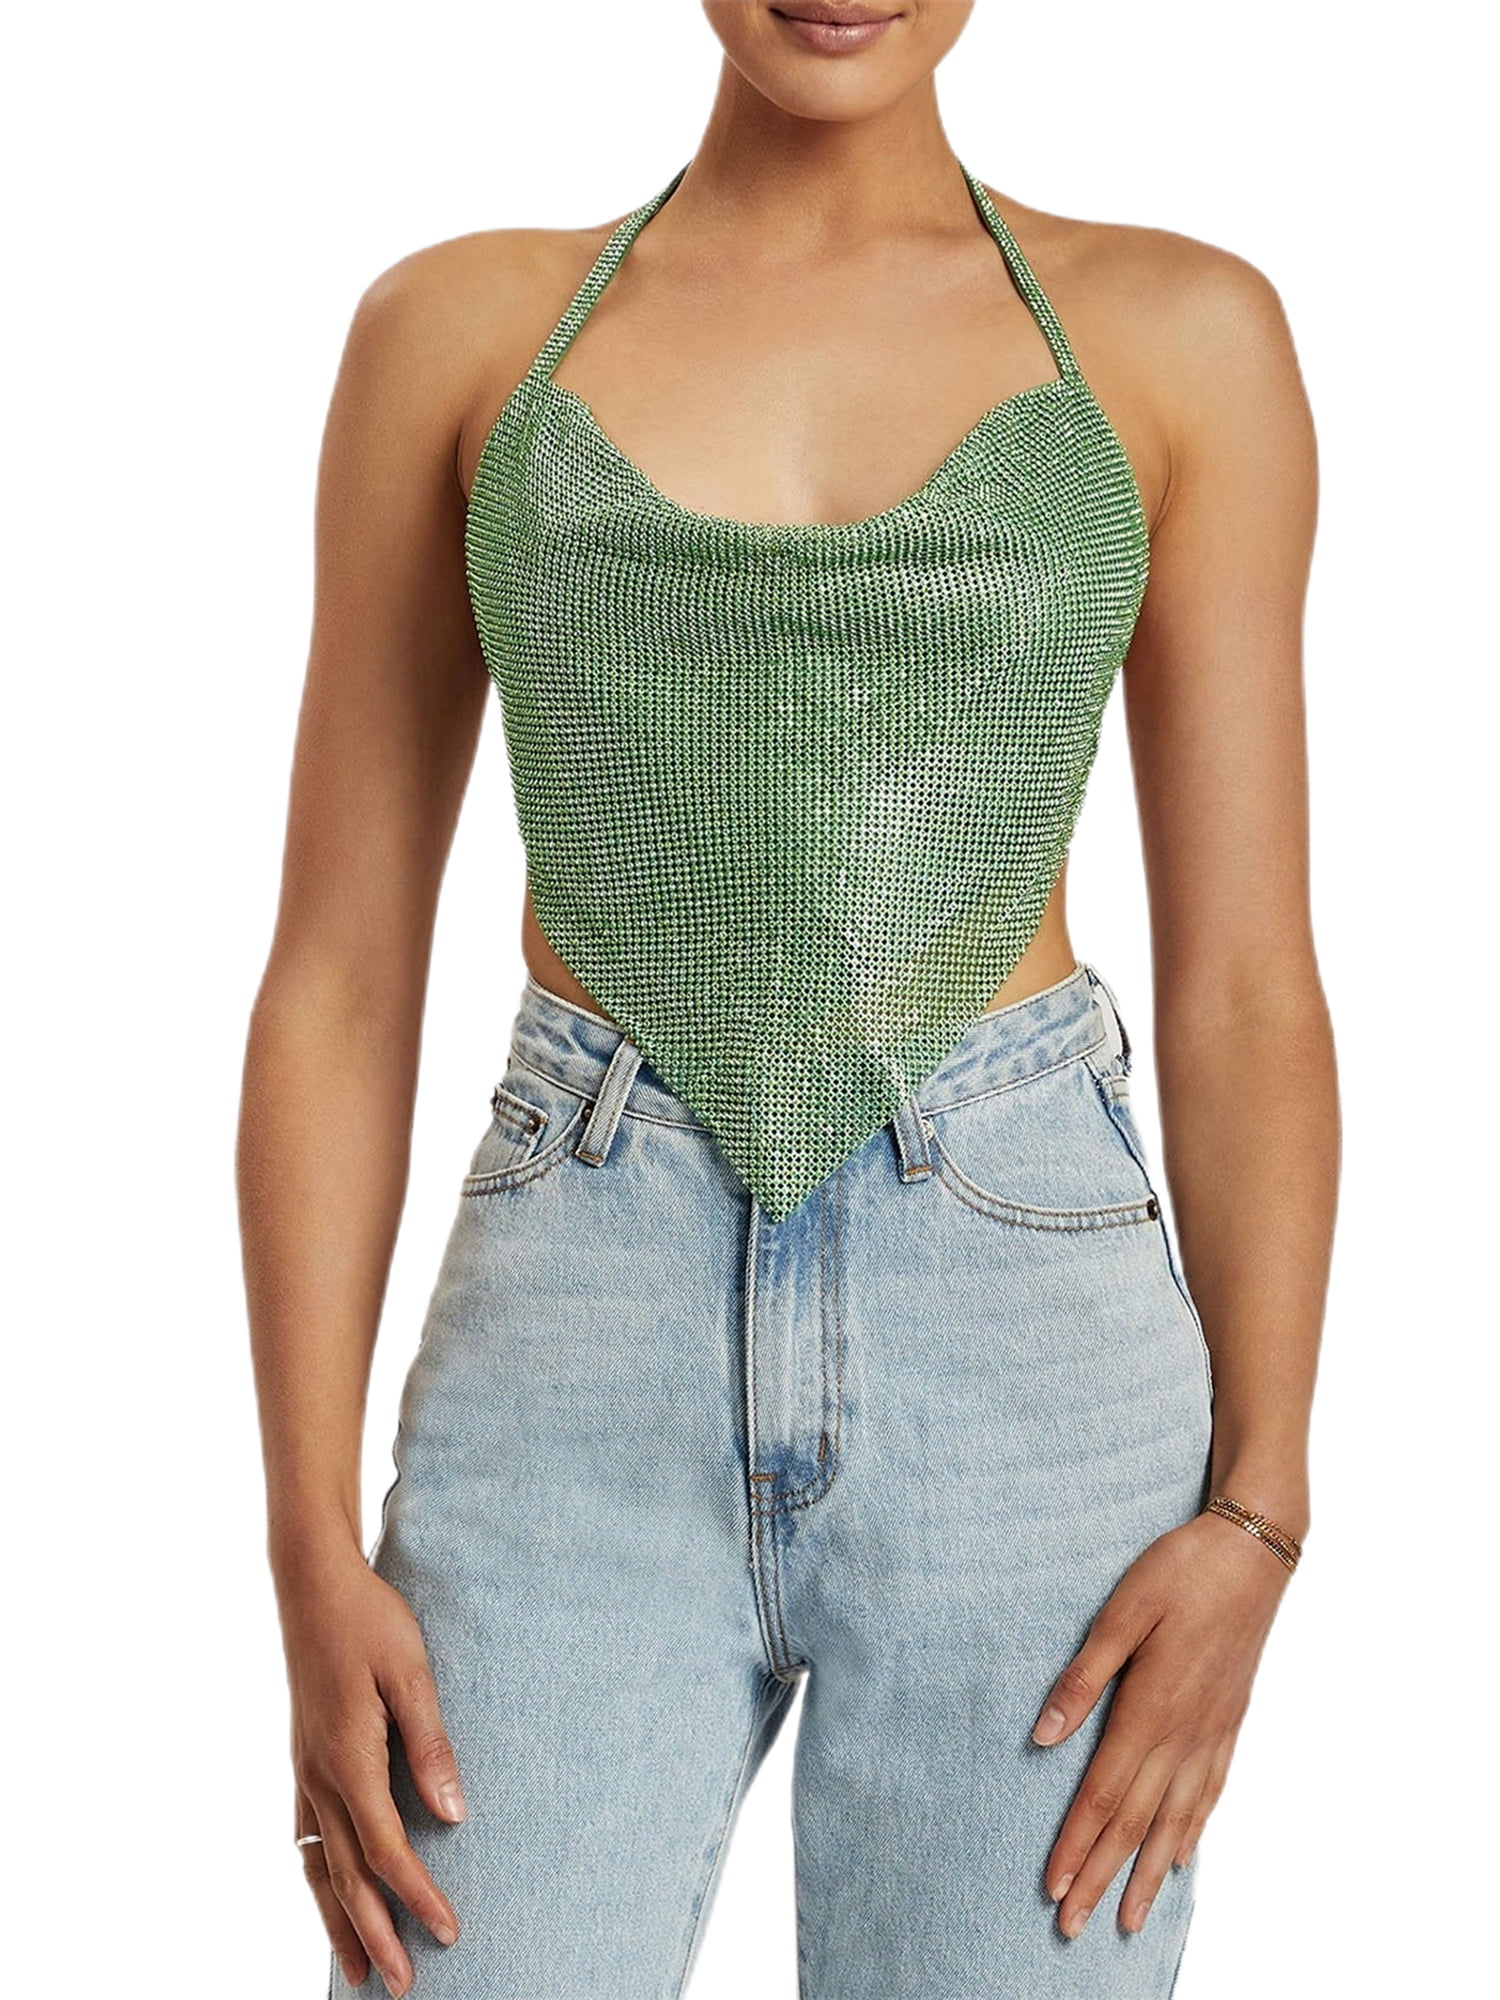 Gureui Women's Sparkly Halter Tank Tops, Backless Chains Linked Cowl ...